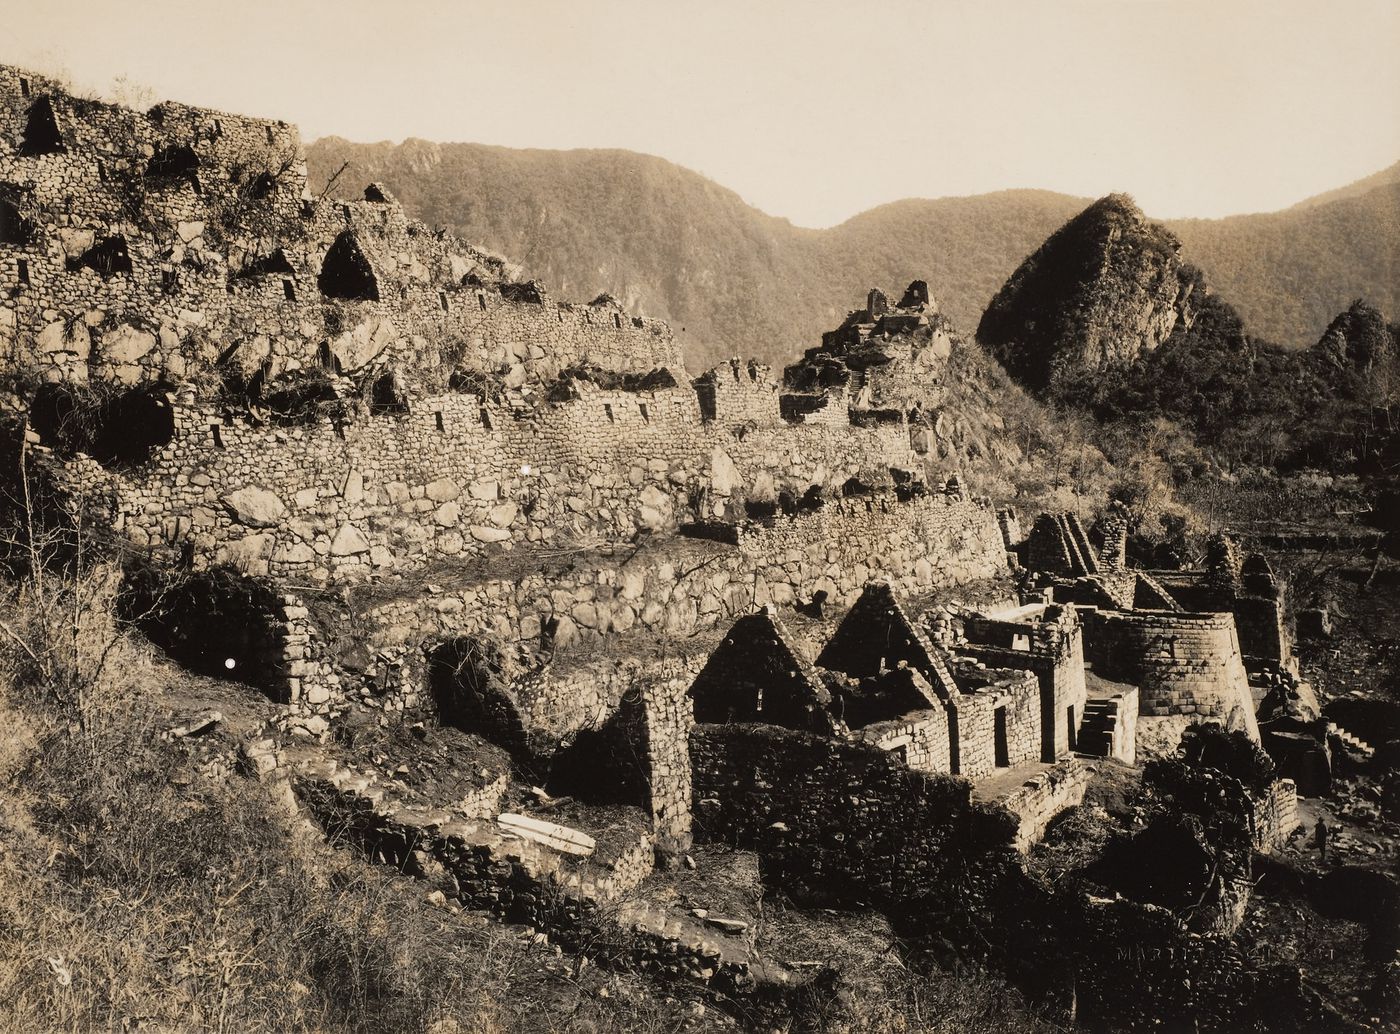 Partial view of the House of Ñusta [princess], the Torreón, unidentified buildings, and retaining walls with Intihuatana Hill in the background, Machu Picchu, Peru